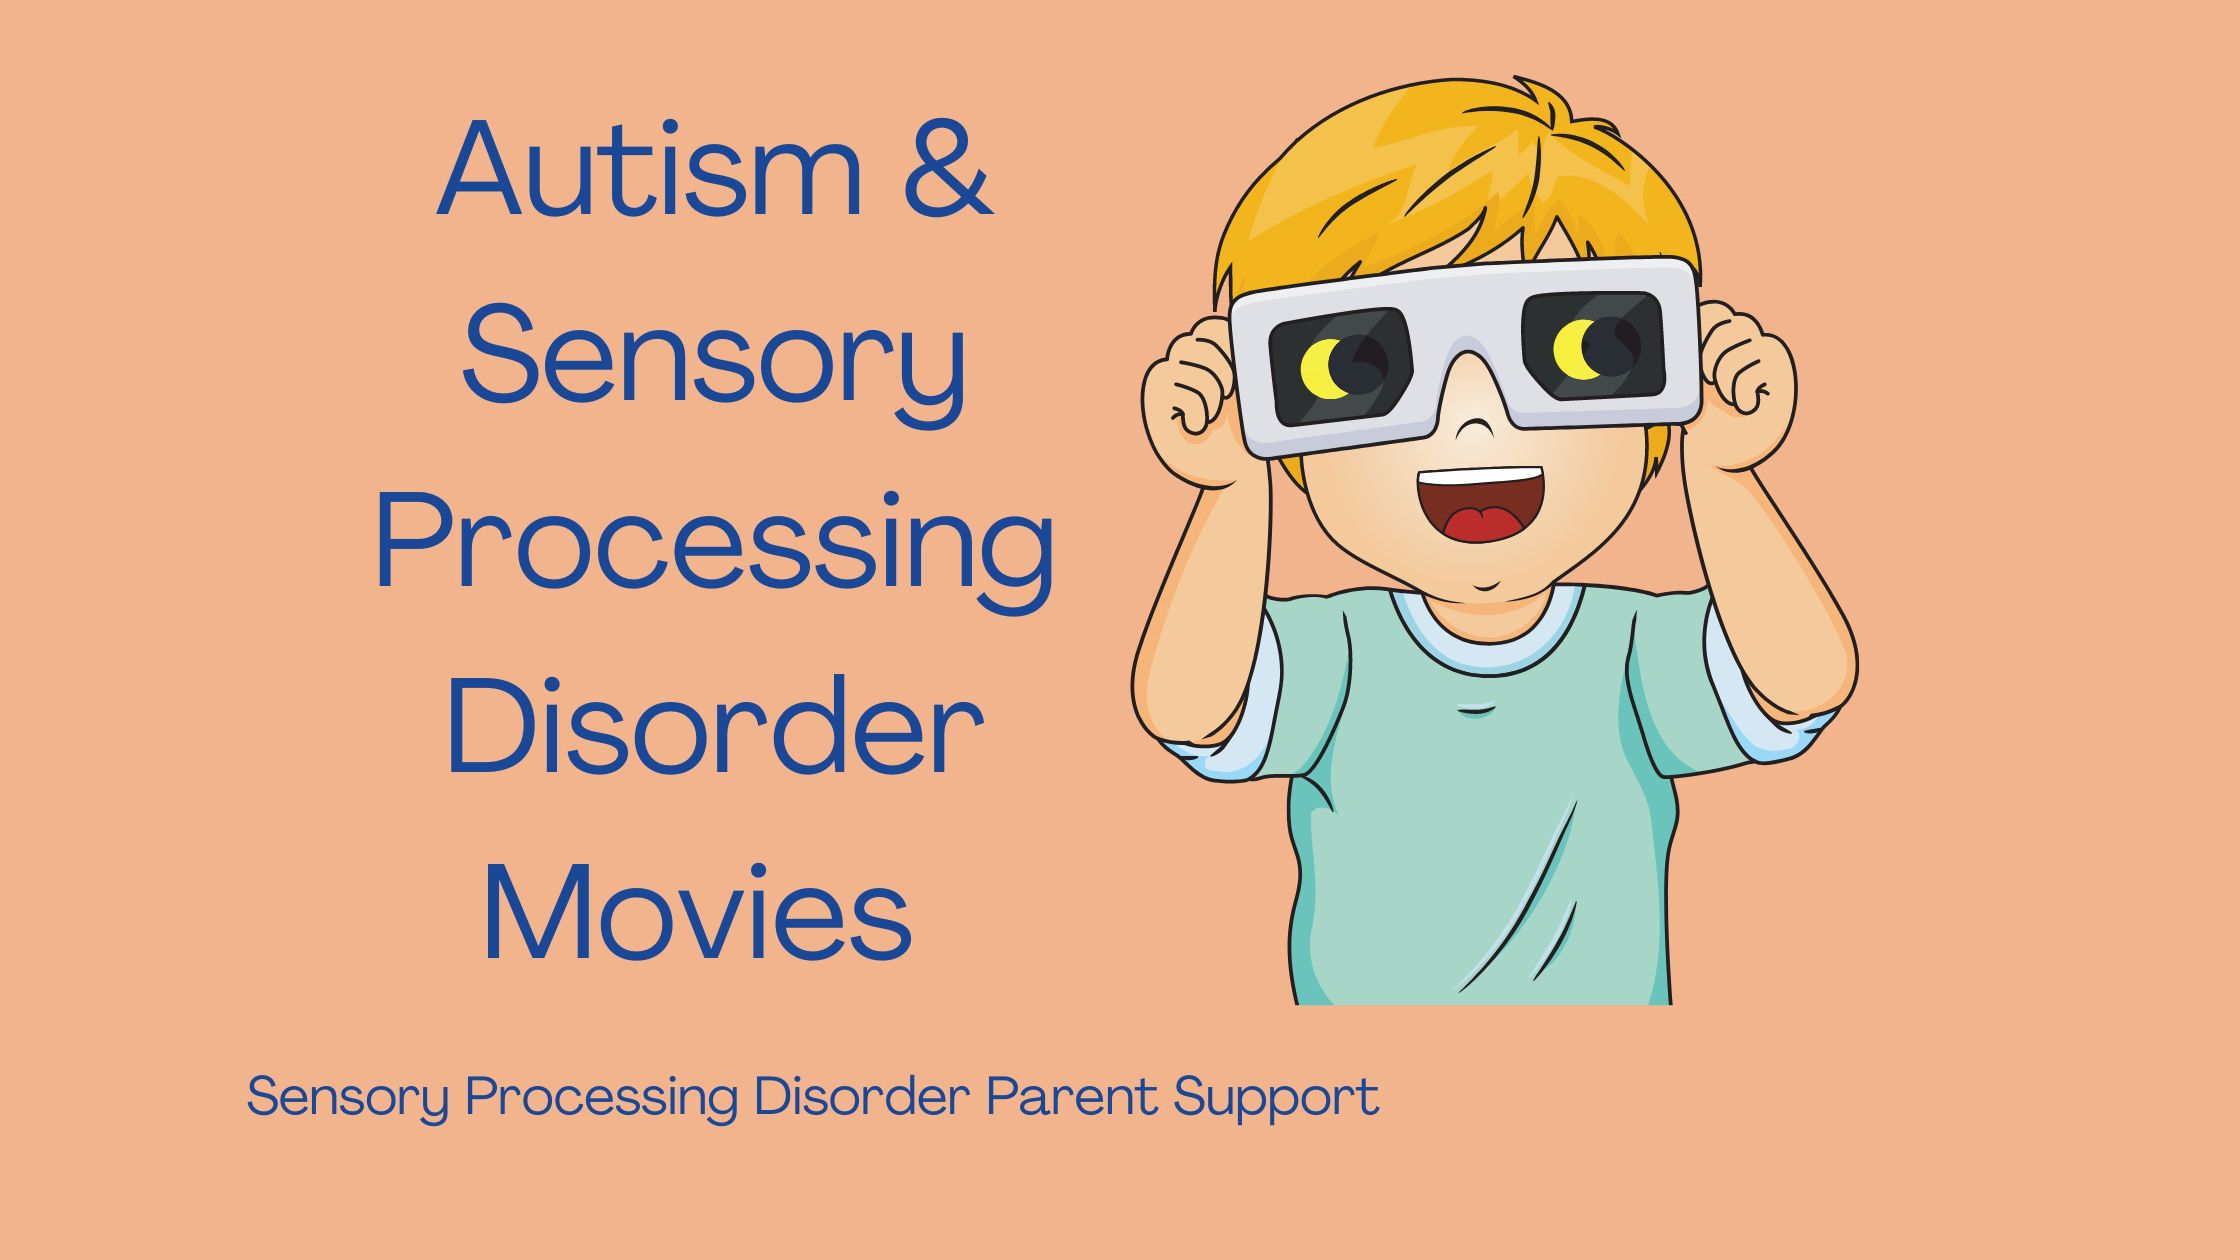 an autistic child who has sensory processing disorder wearing 3D glasses watching a movie about SPD and autism. Autism & Sensory Processing Disorder Movies